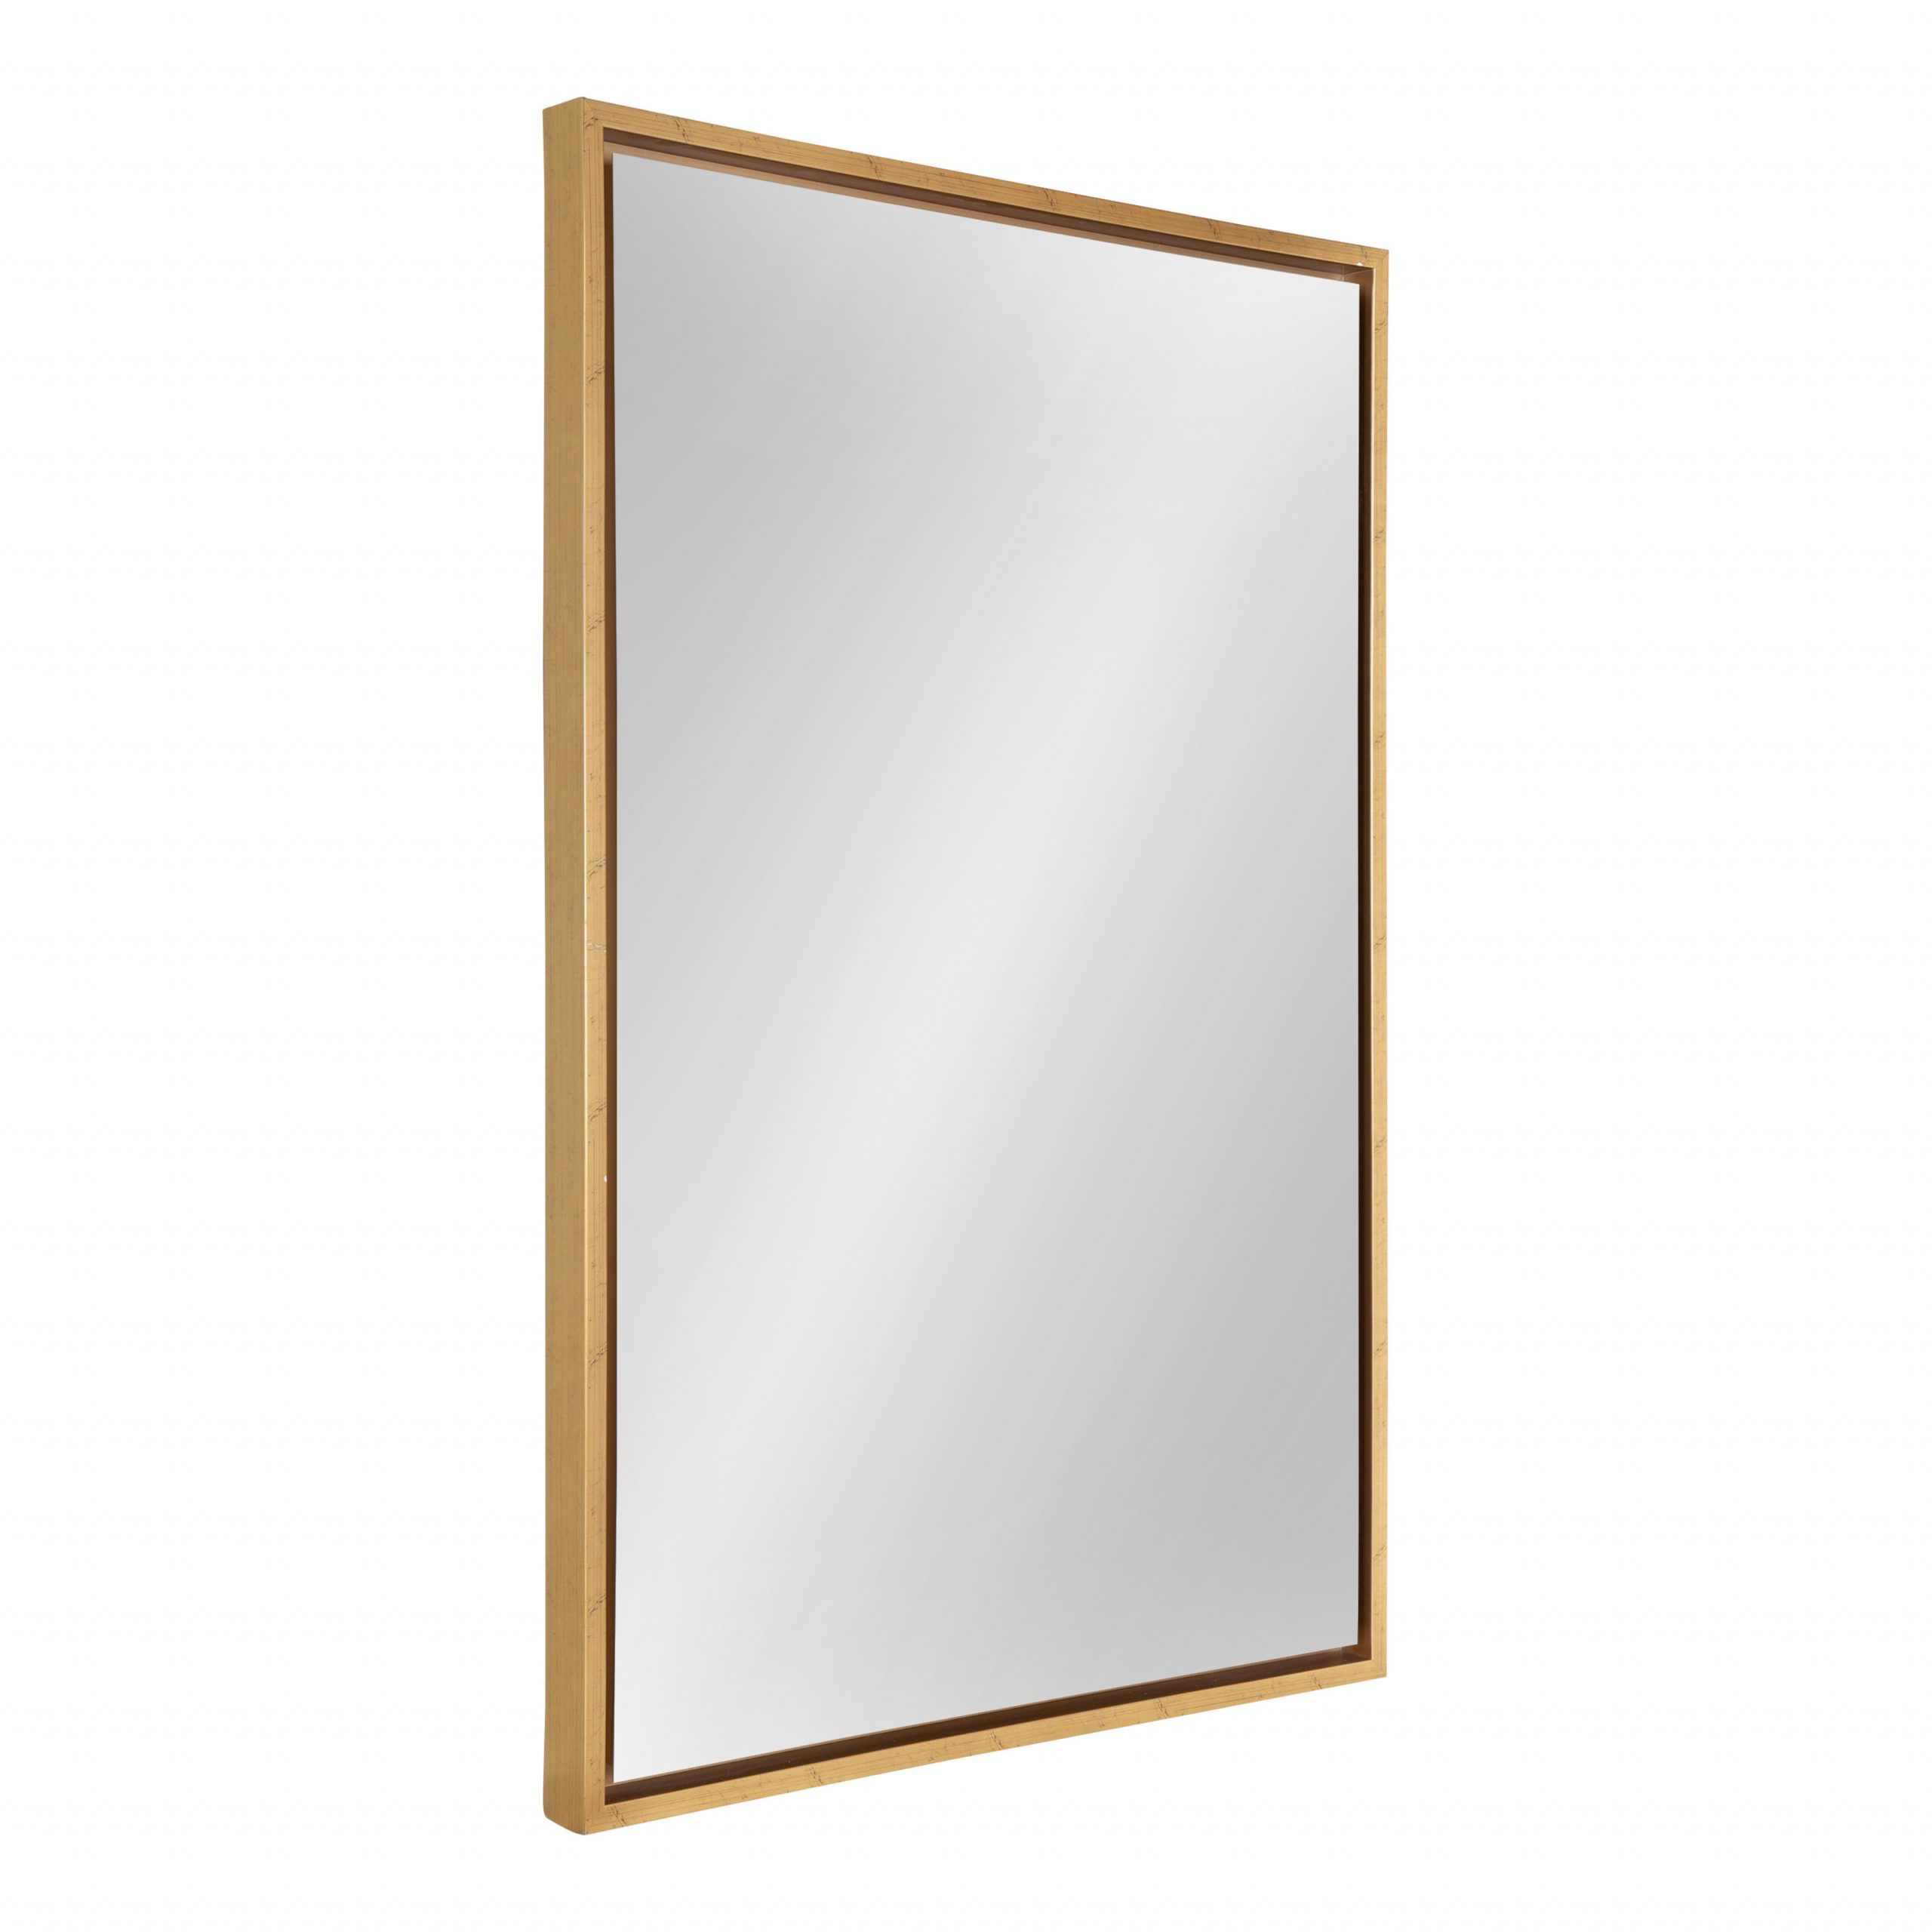 Kate And Laurel Evans Glam Framed Floating Wall Mirror, 24" X 36", Gold Regarding Broadmeadow Glam Accent Wall Mirrors (View 11 of 15)